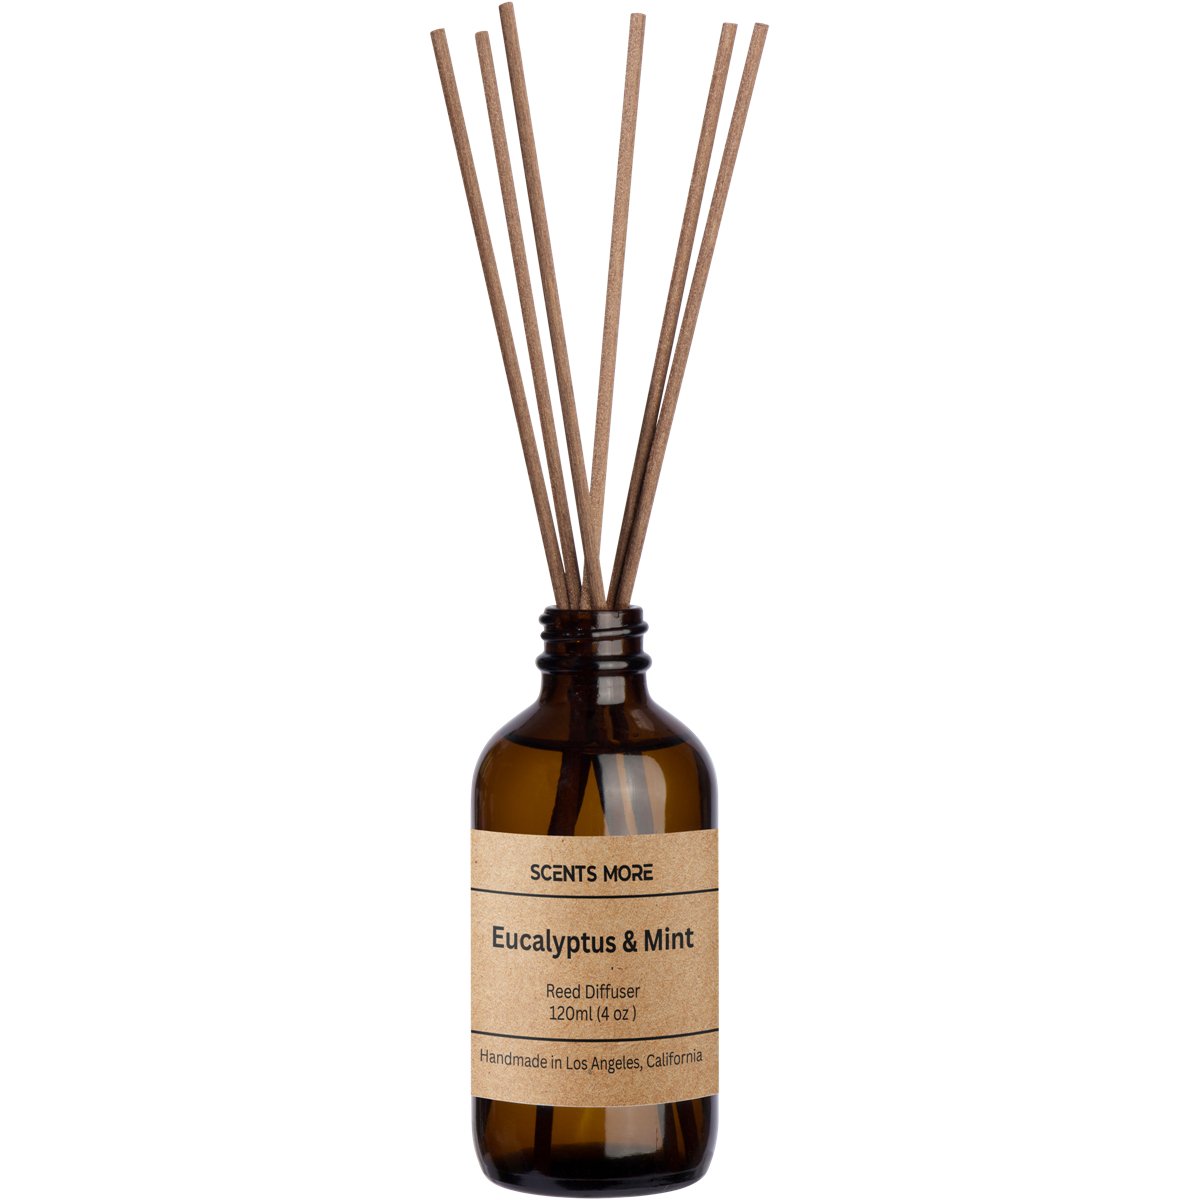 Eucalyptus & Mint Reed Diffuser - Scents More